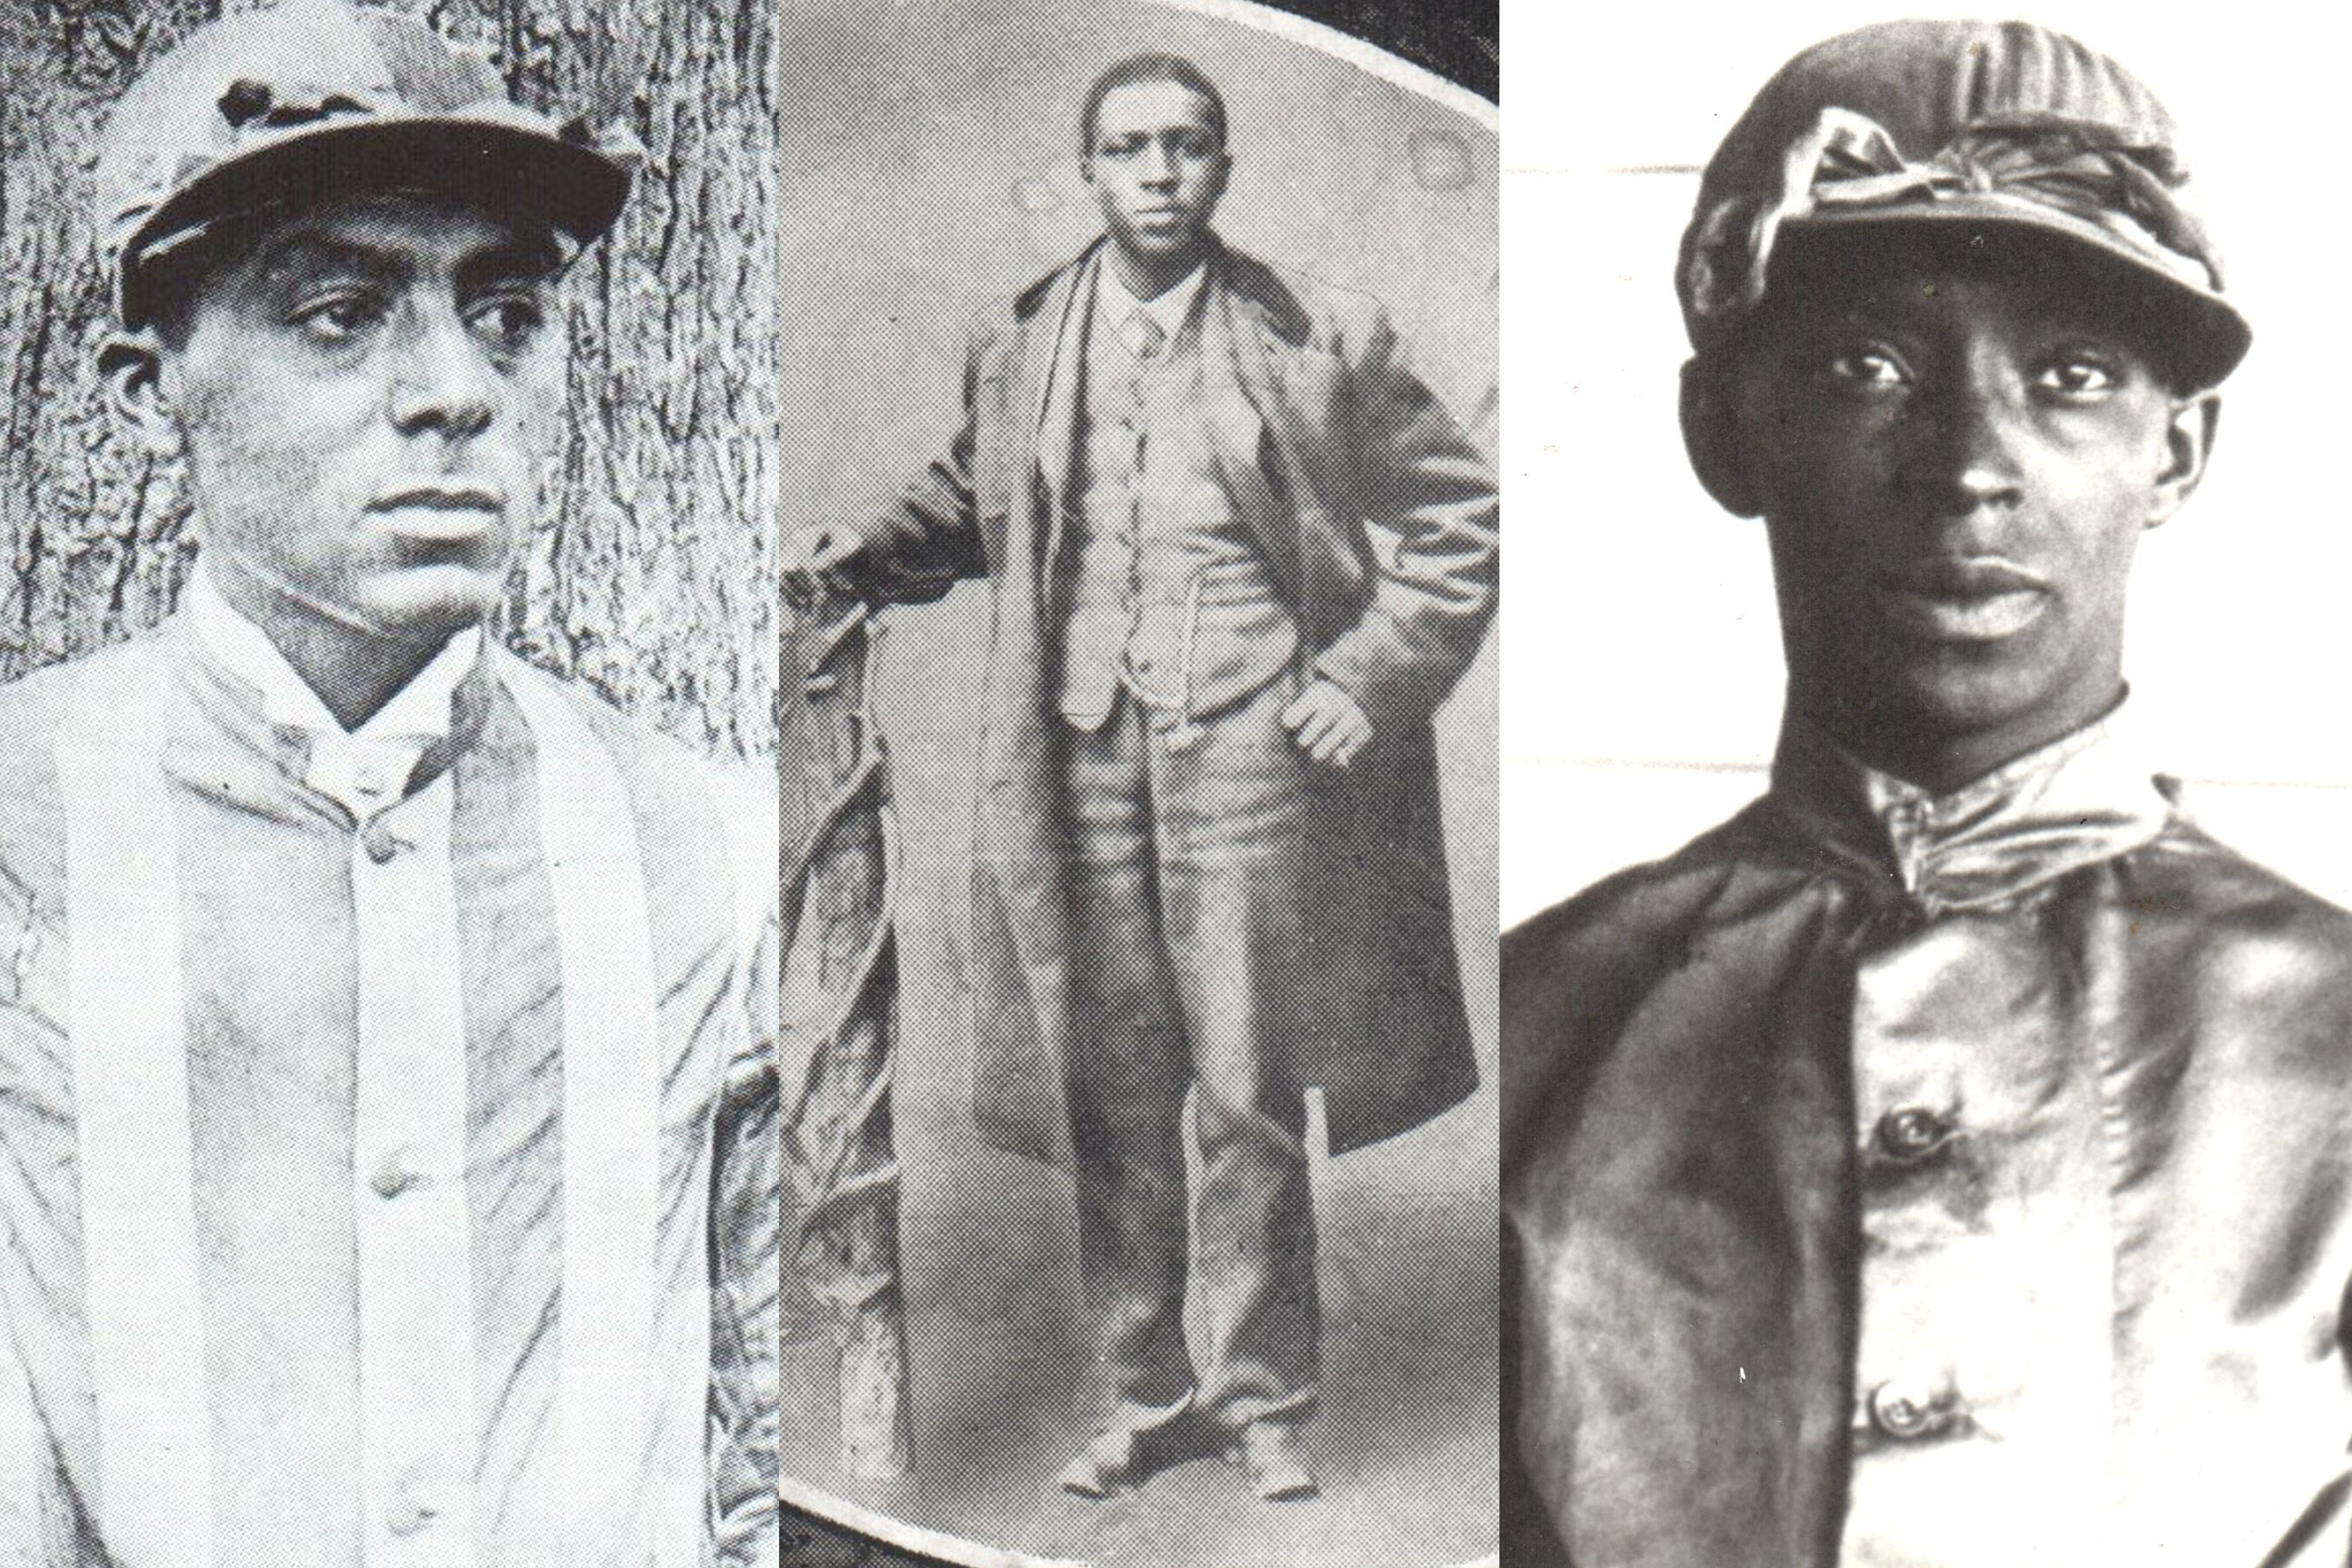 (L-R) Isaac Murphy, Oliver Lewis, Jimmy Winkfield—African-American jockeys dominated the Kentucky Derby in its early years. (Courtesy of the Kentucky Derby Museum)